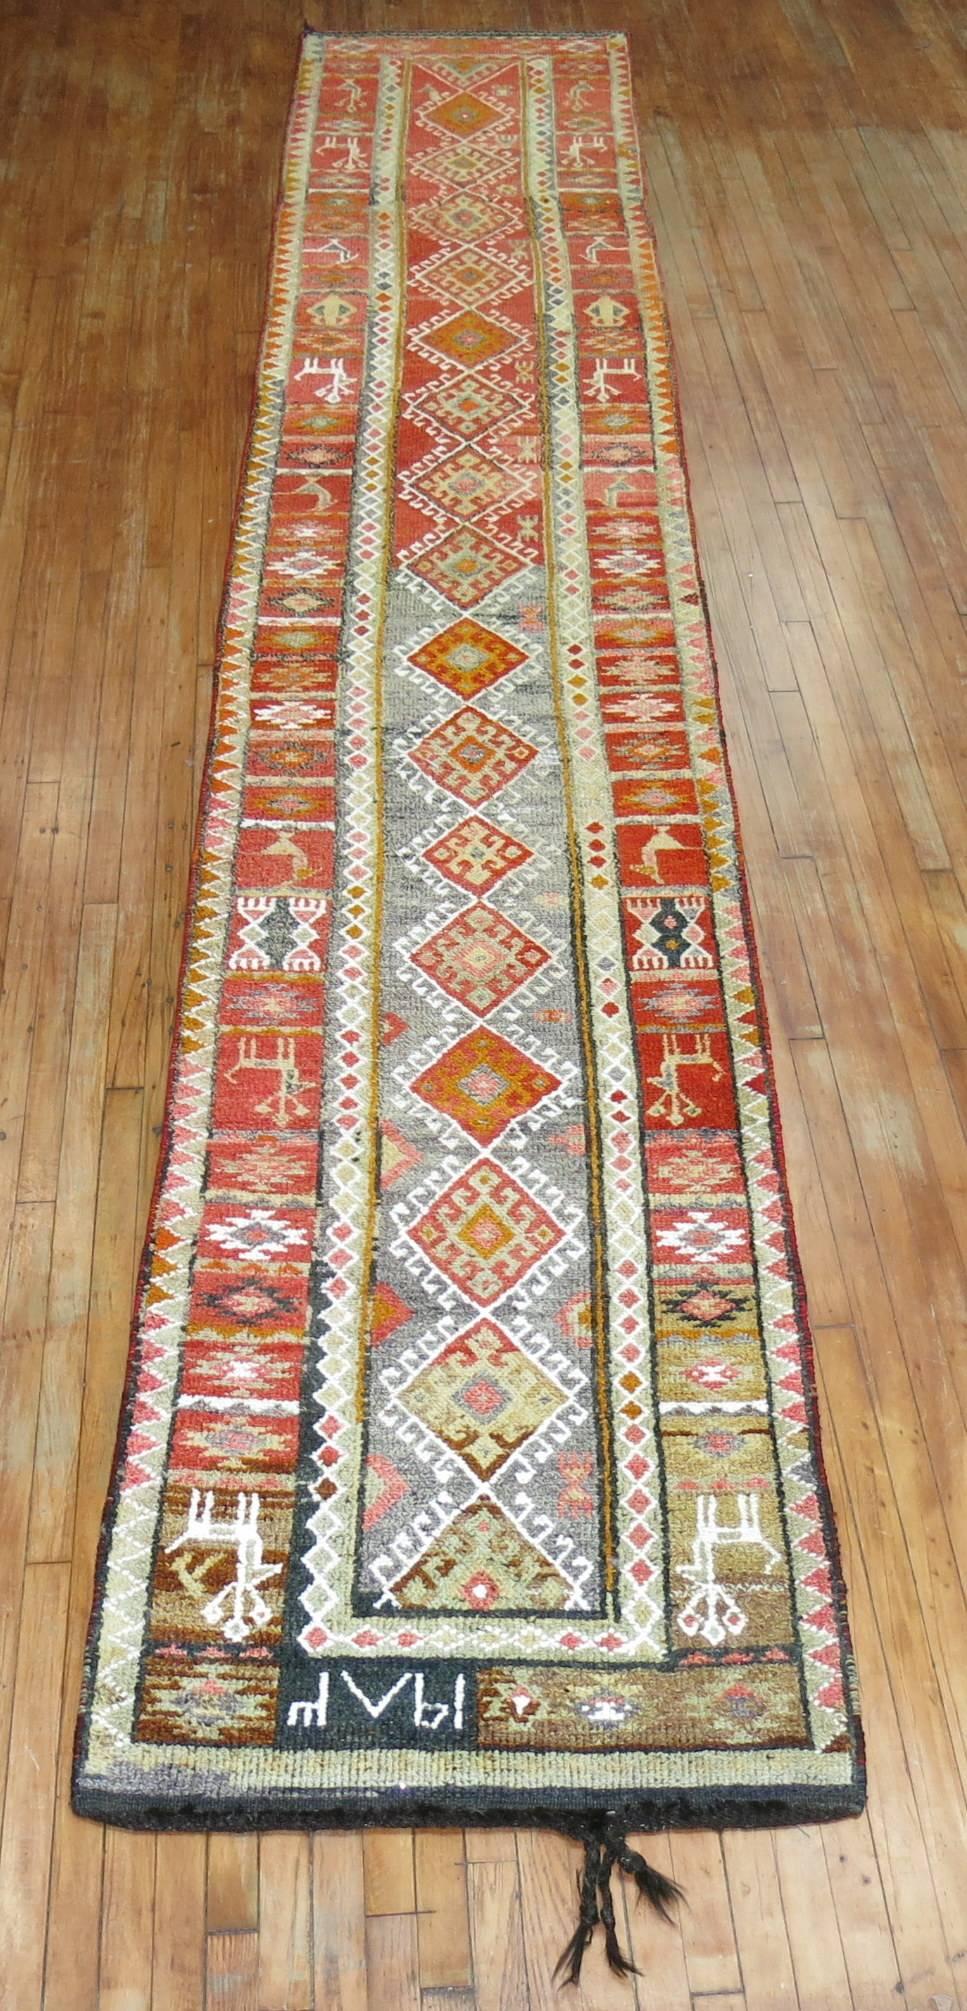 Rare size 20th century Turkish Anatolian runner. We love the one long fringe on one end of the piece giving it added unique element.